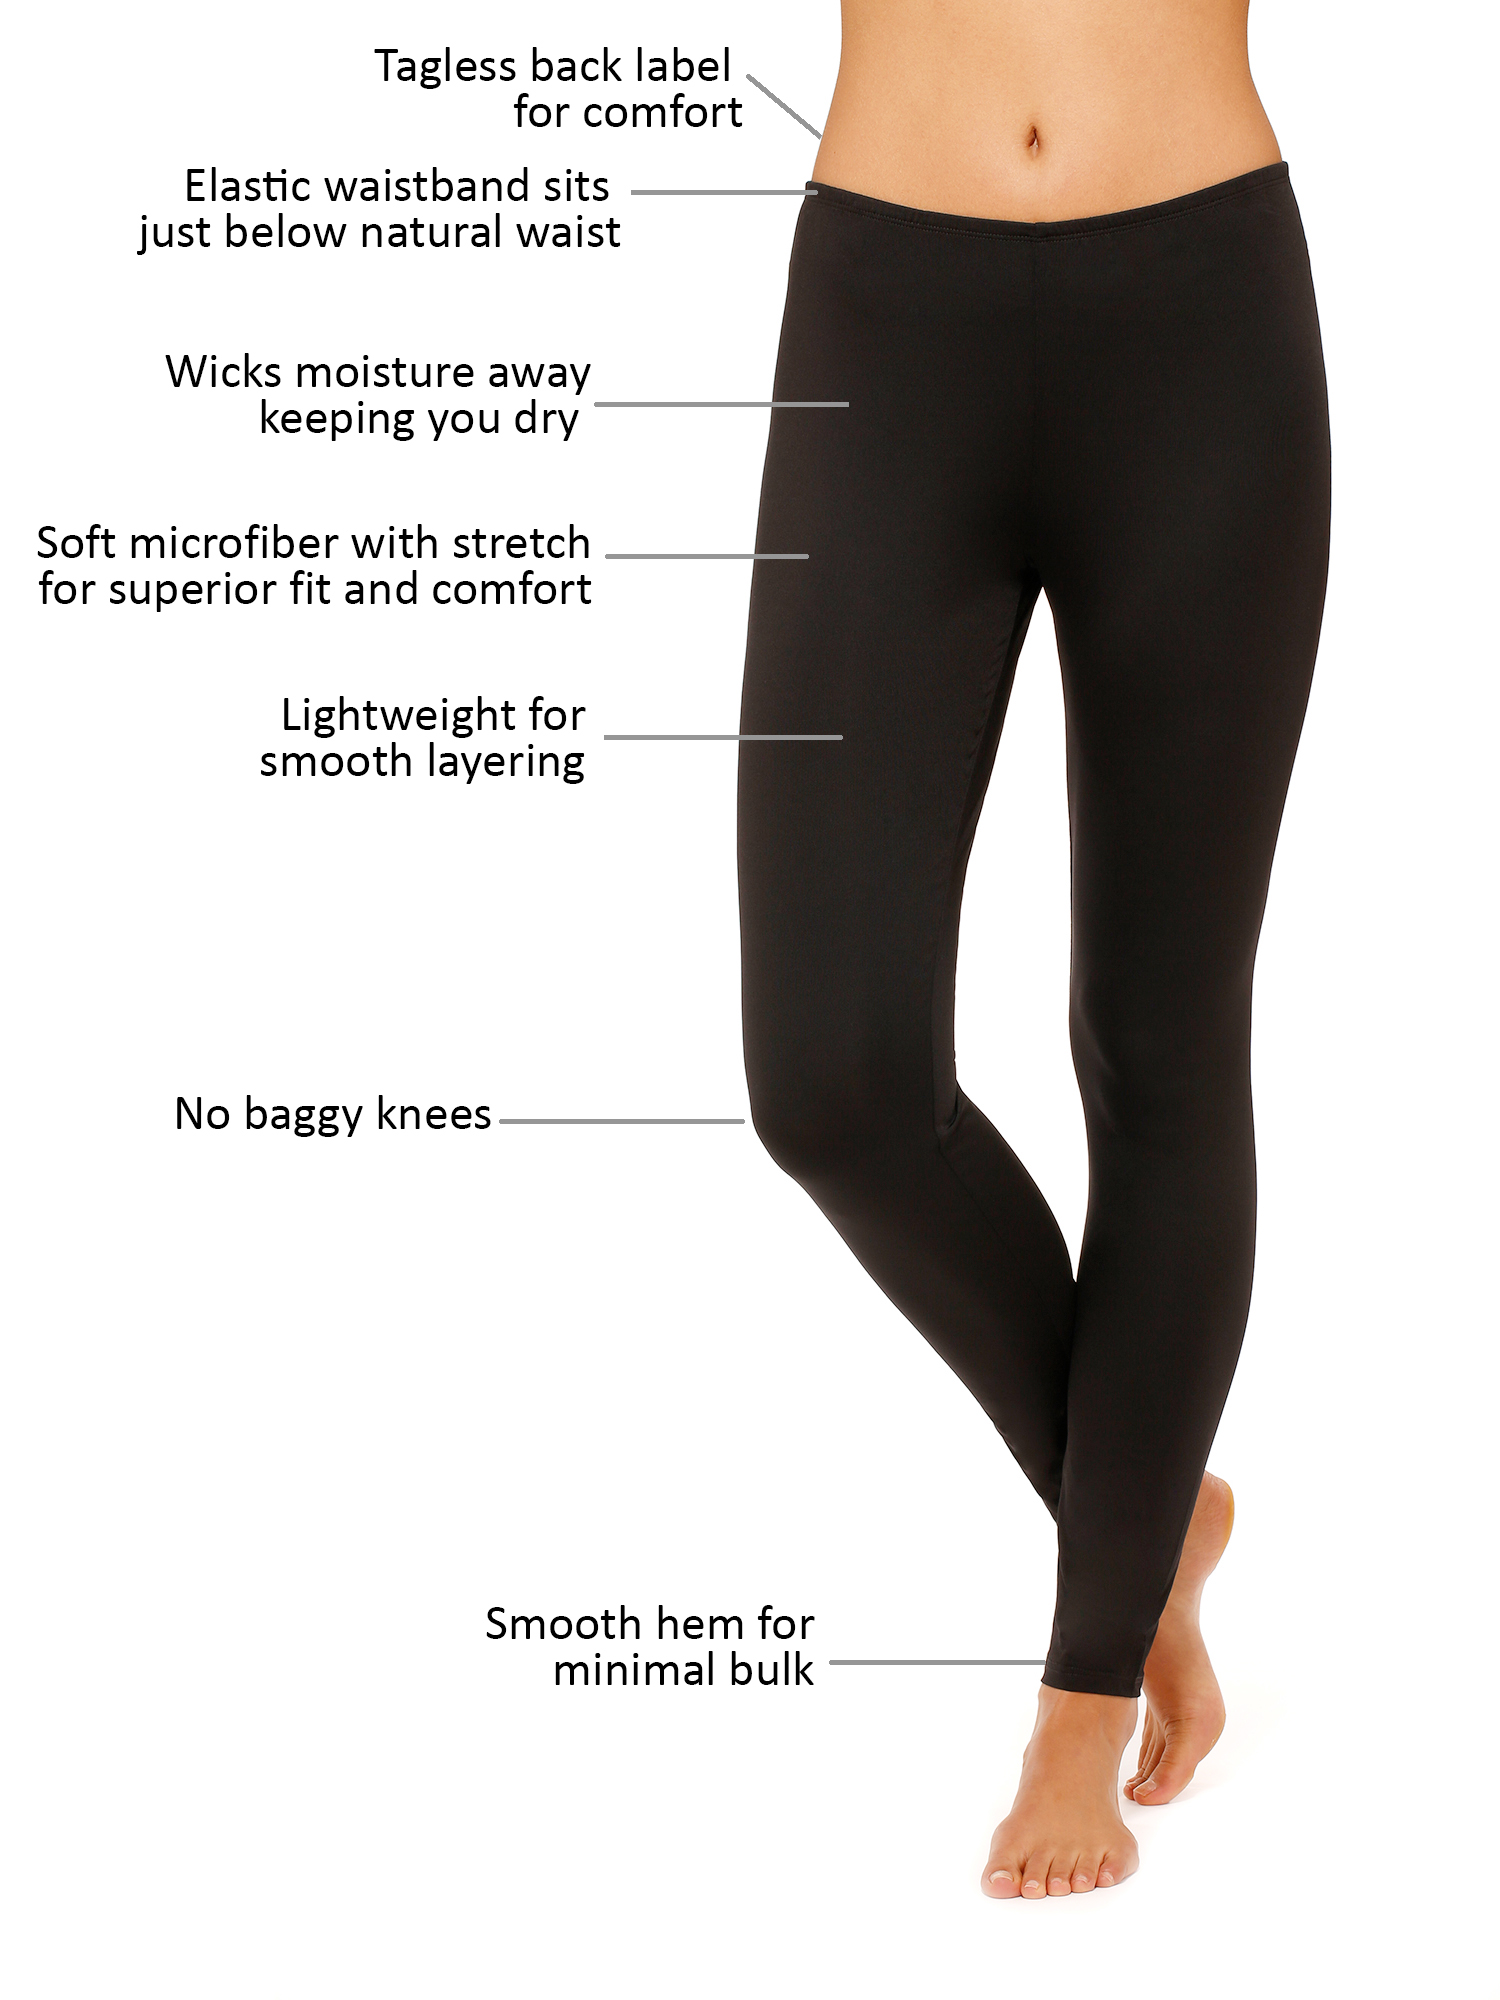 ClimateRight by Cuddl Duds Women's and Women's Plus Stretch Microfiber Base Layer Legging - image 3 of 3